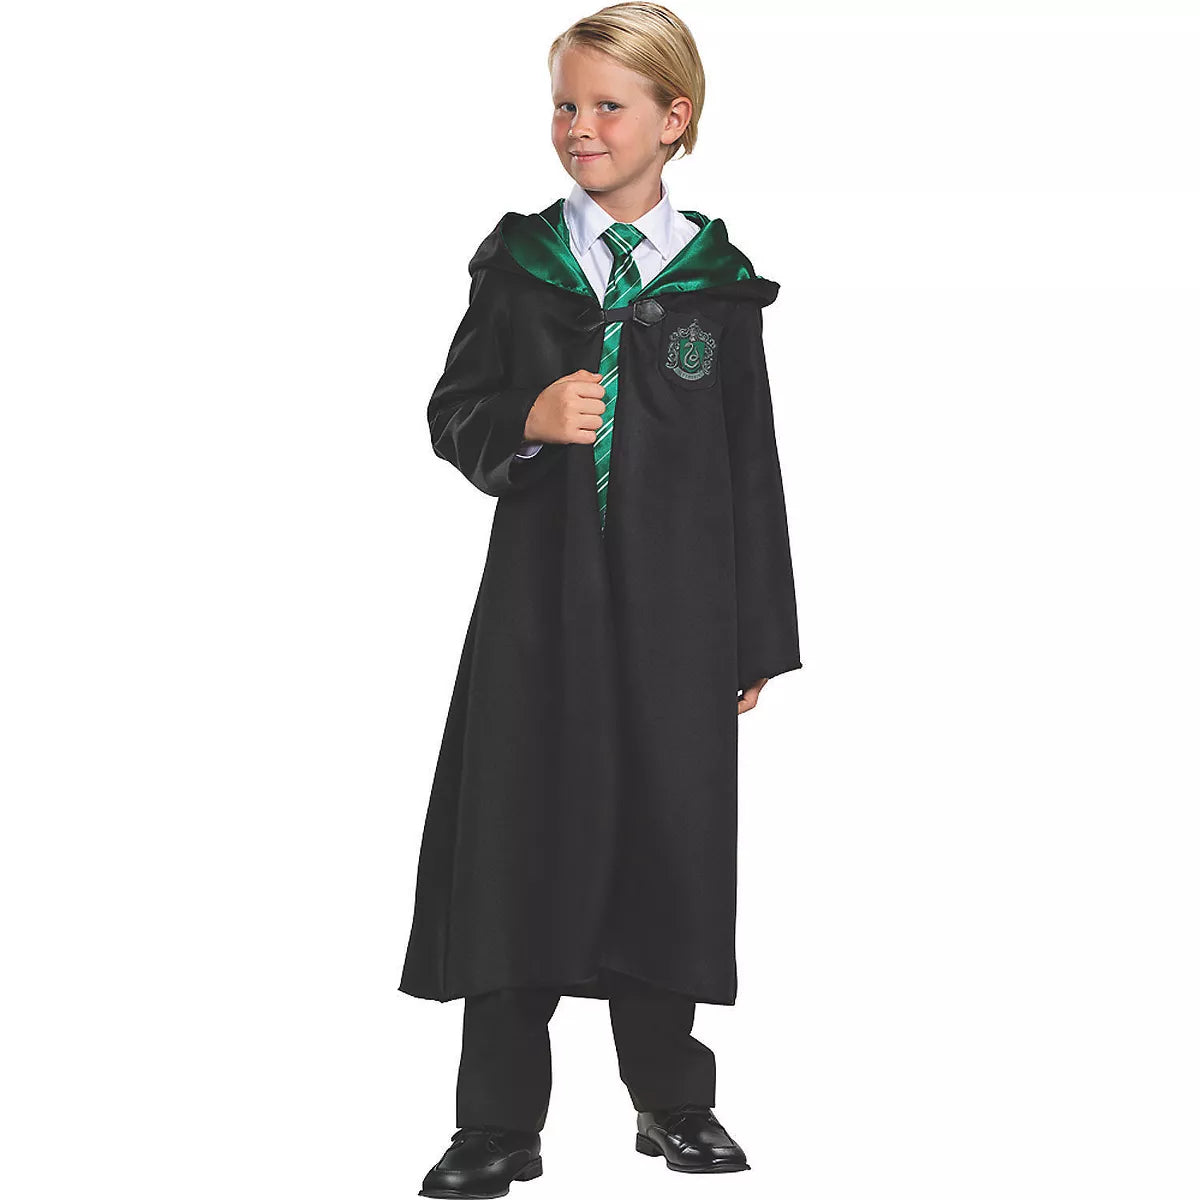 Slytherin Costume Pack - Tie Dress Tattoos - Kids - Boutique Harry Potter